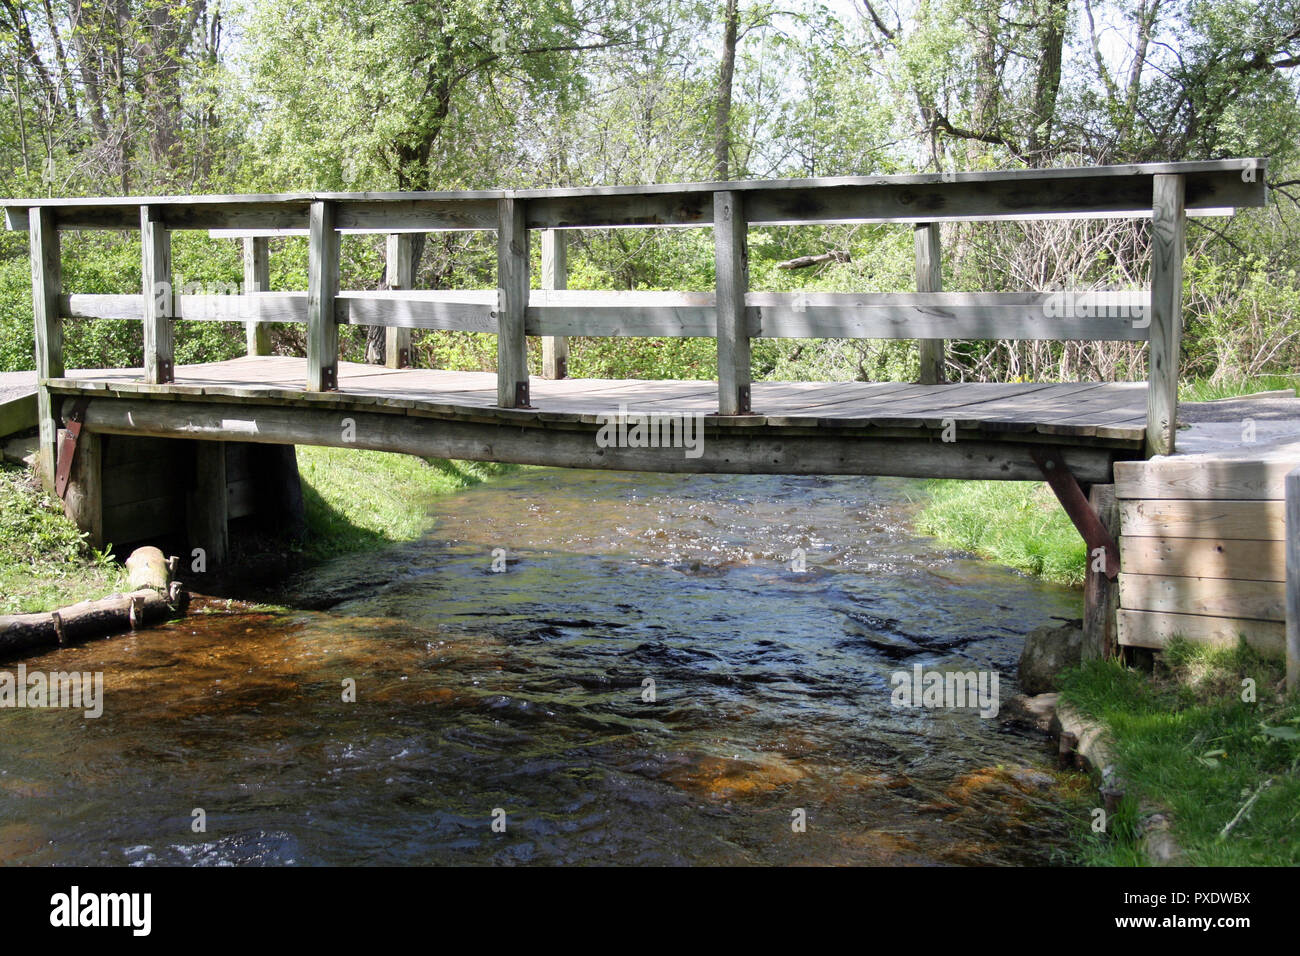 Picturesque wooden bridge spans the rushing water and rocks of a quaint village park. Eddies of pooling water bubble along green tree and grassy banks Stock Photo